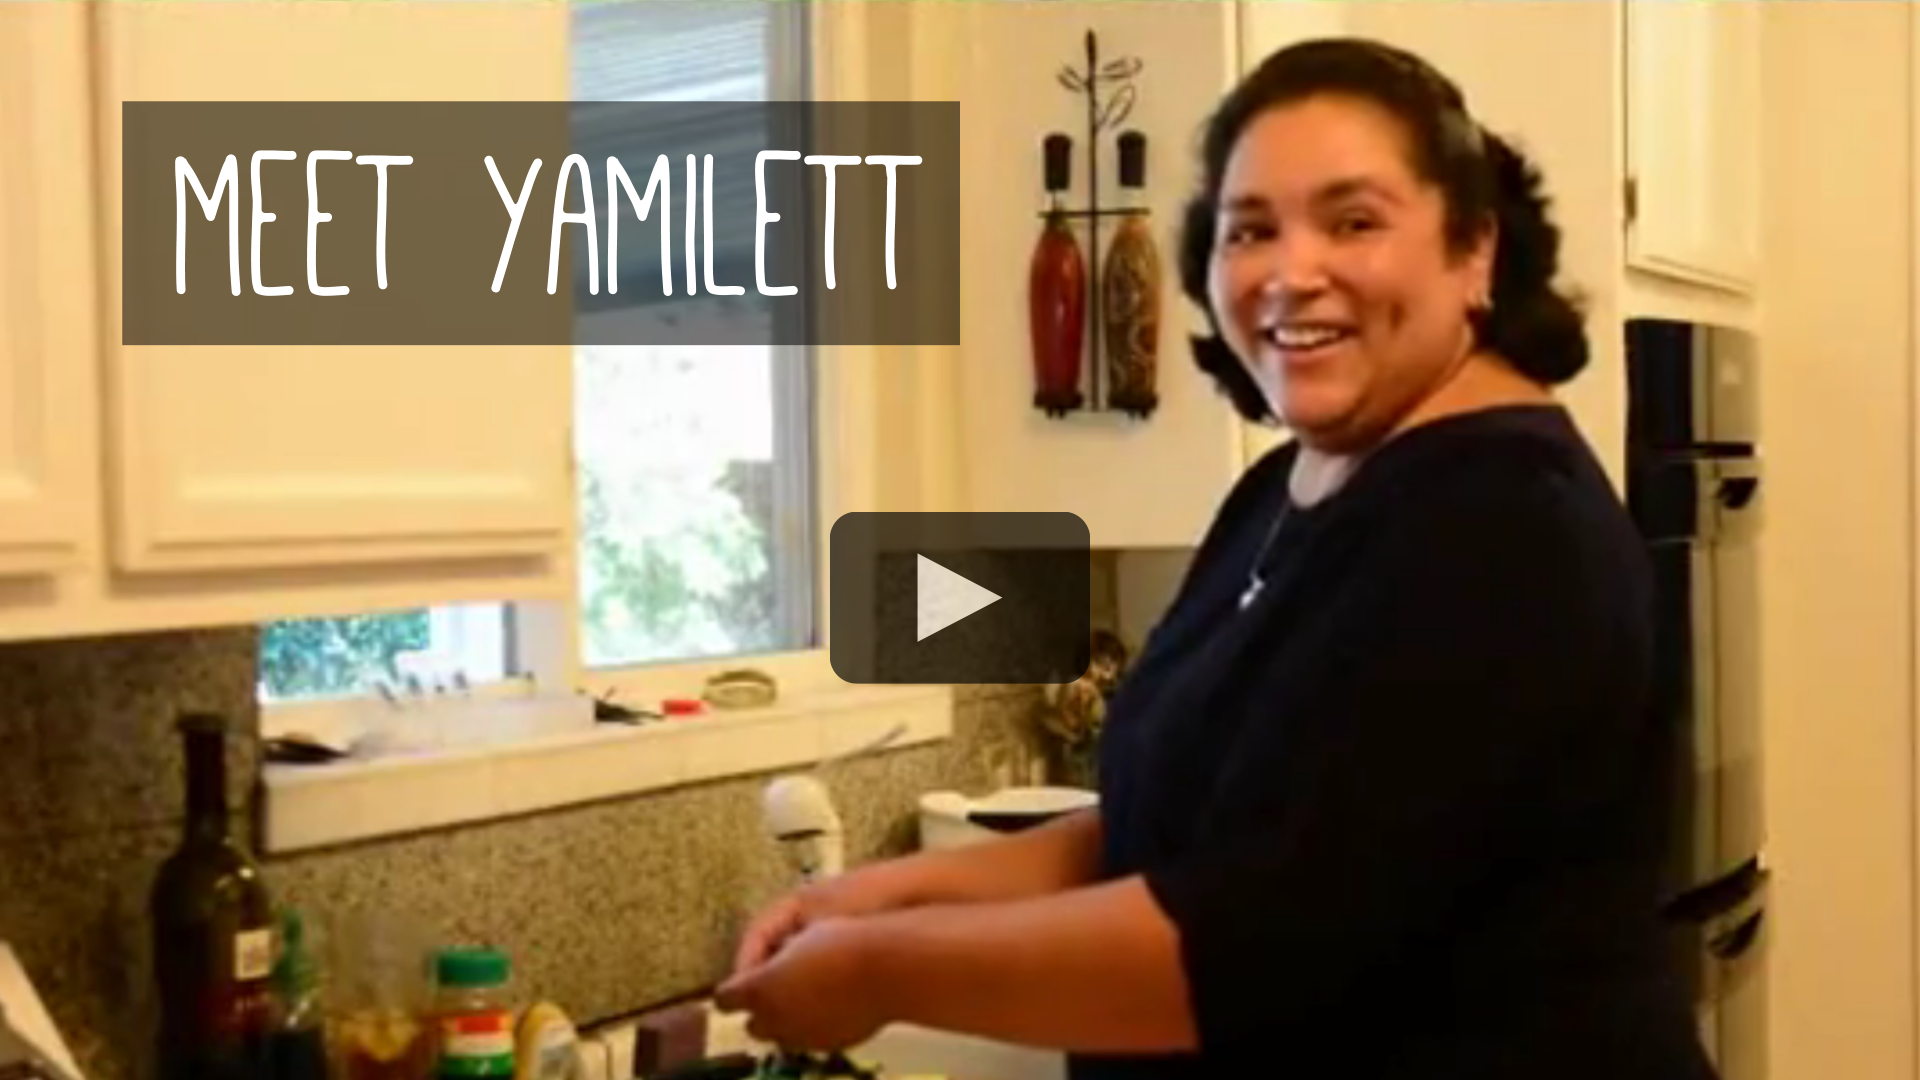 This video goes over Yamilett’s story as a breast cancer survivor and patient of NorthBay Healthcare.